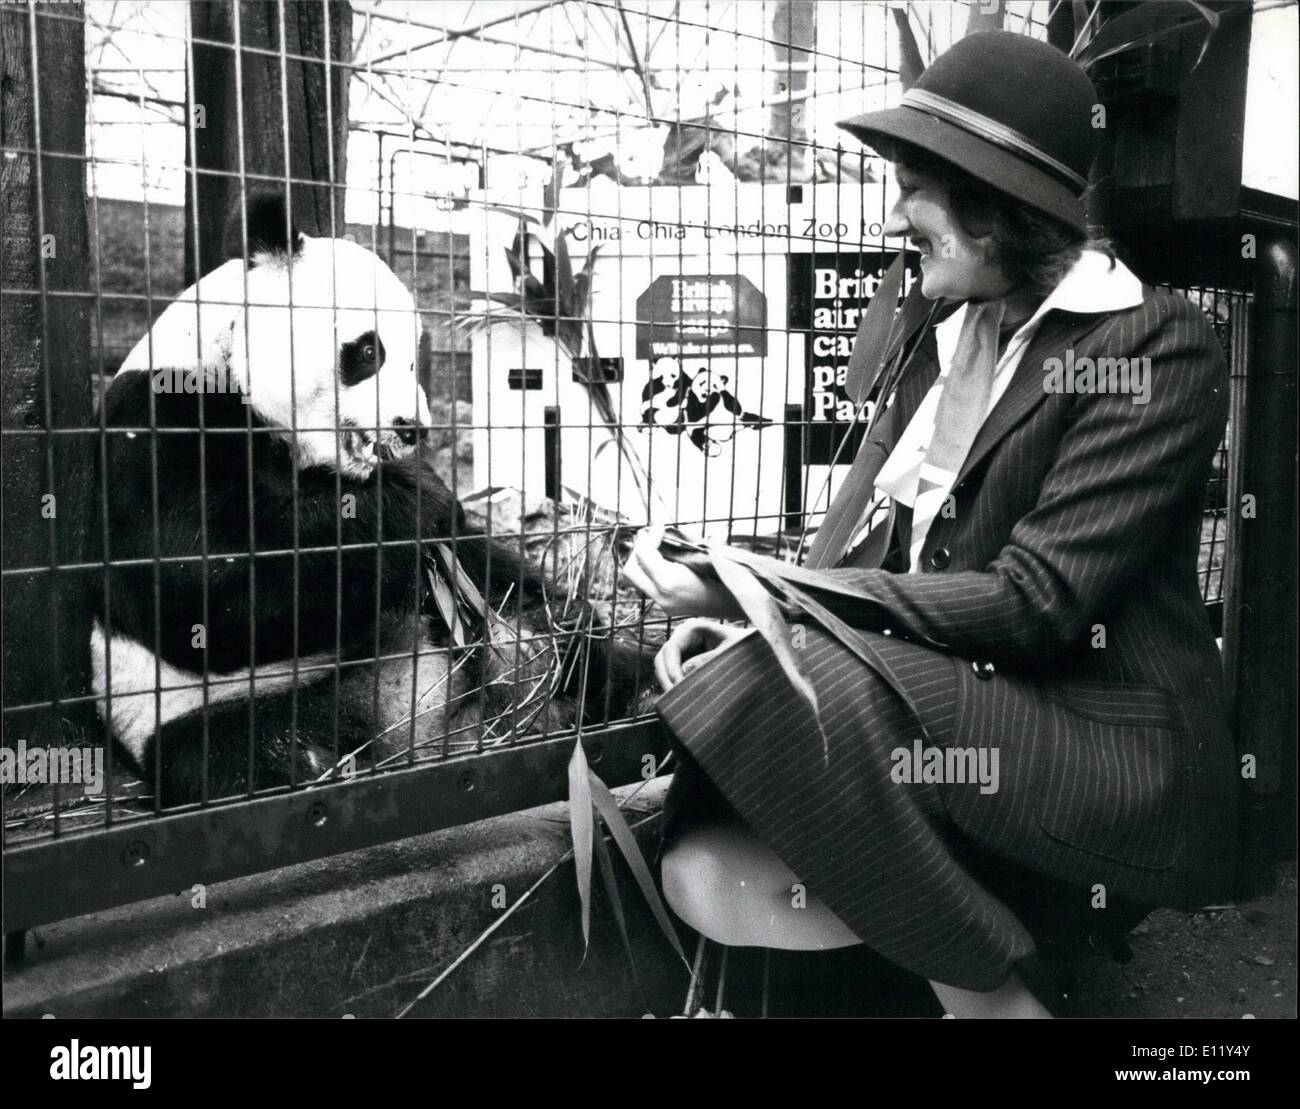 Mar. 03, 1981 - Chia Chia London's Giant Panda Meets His Air hostess Before  Flying off to America: London Zoo's Giant Panda, Chia-Chia, met British  Airways Stewardess, Jacqueline Walker, who gave him